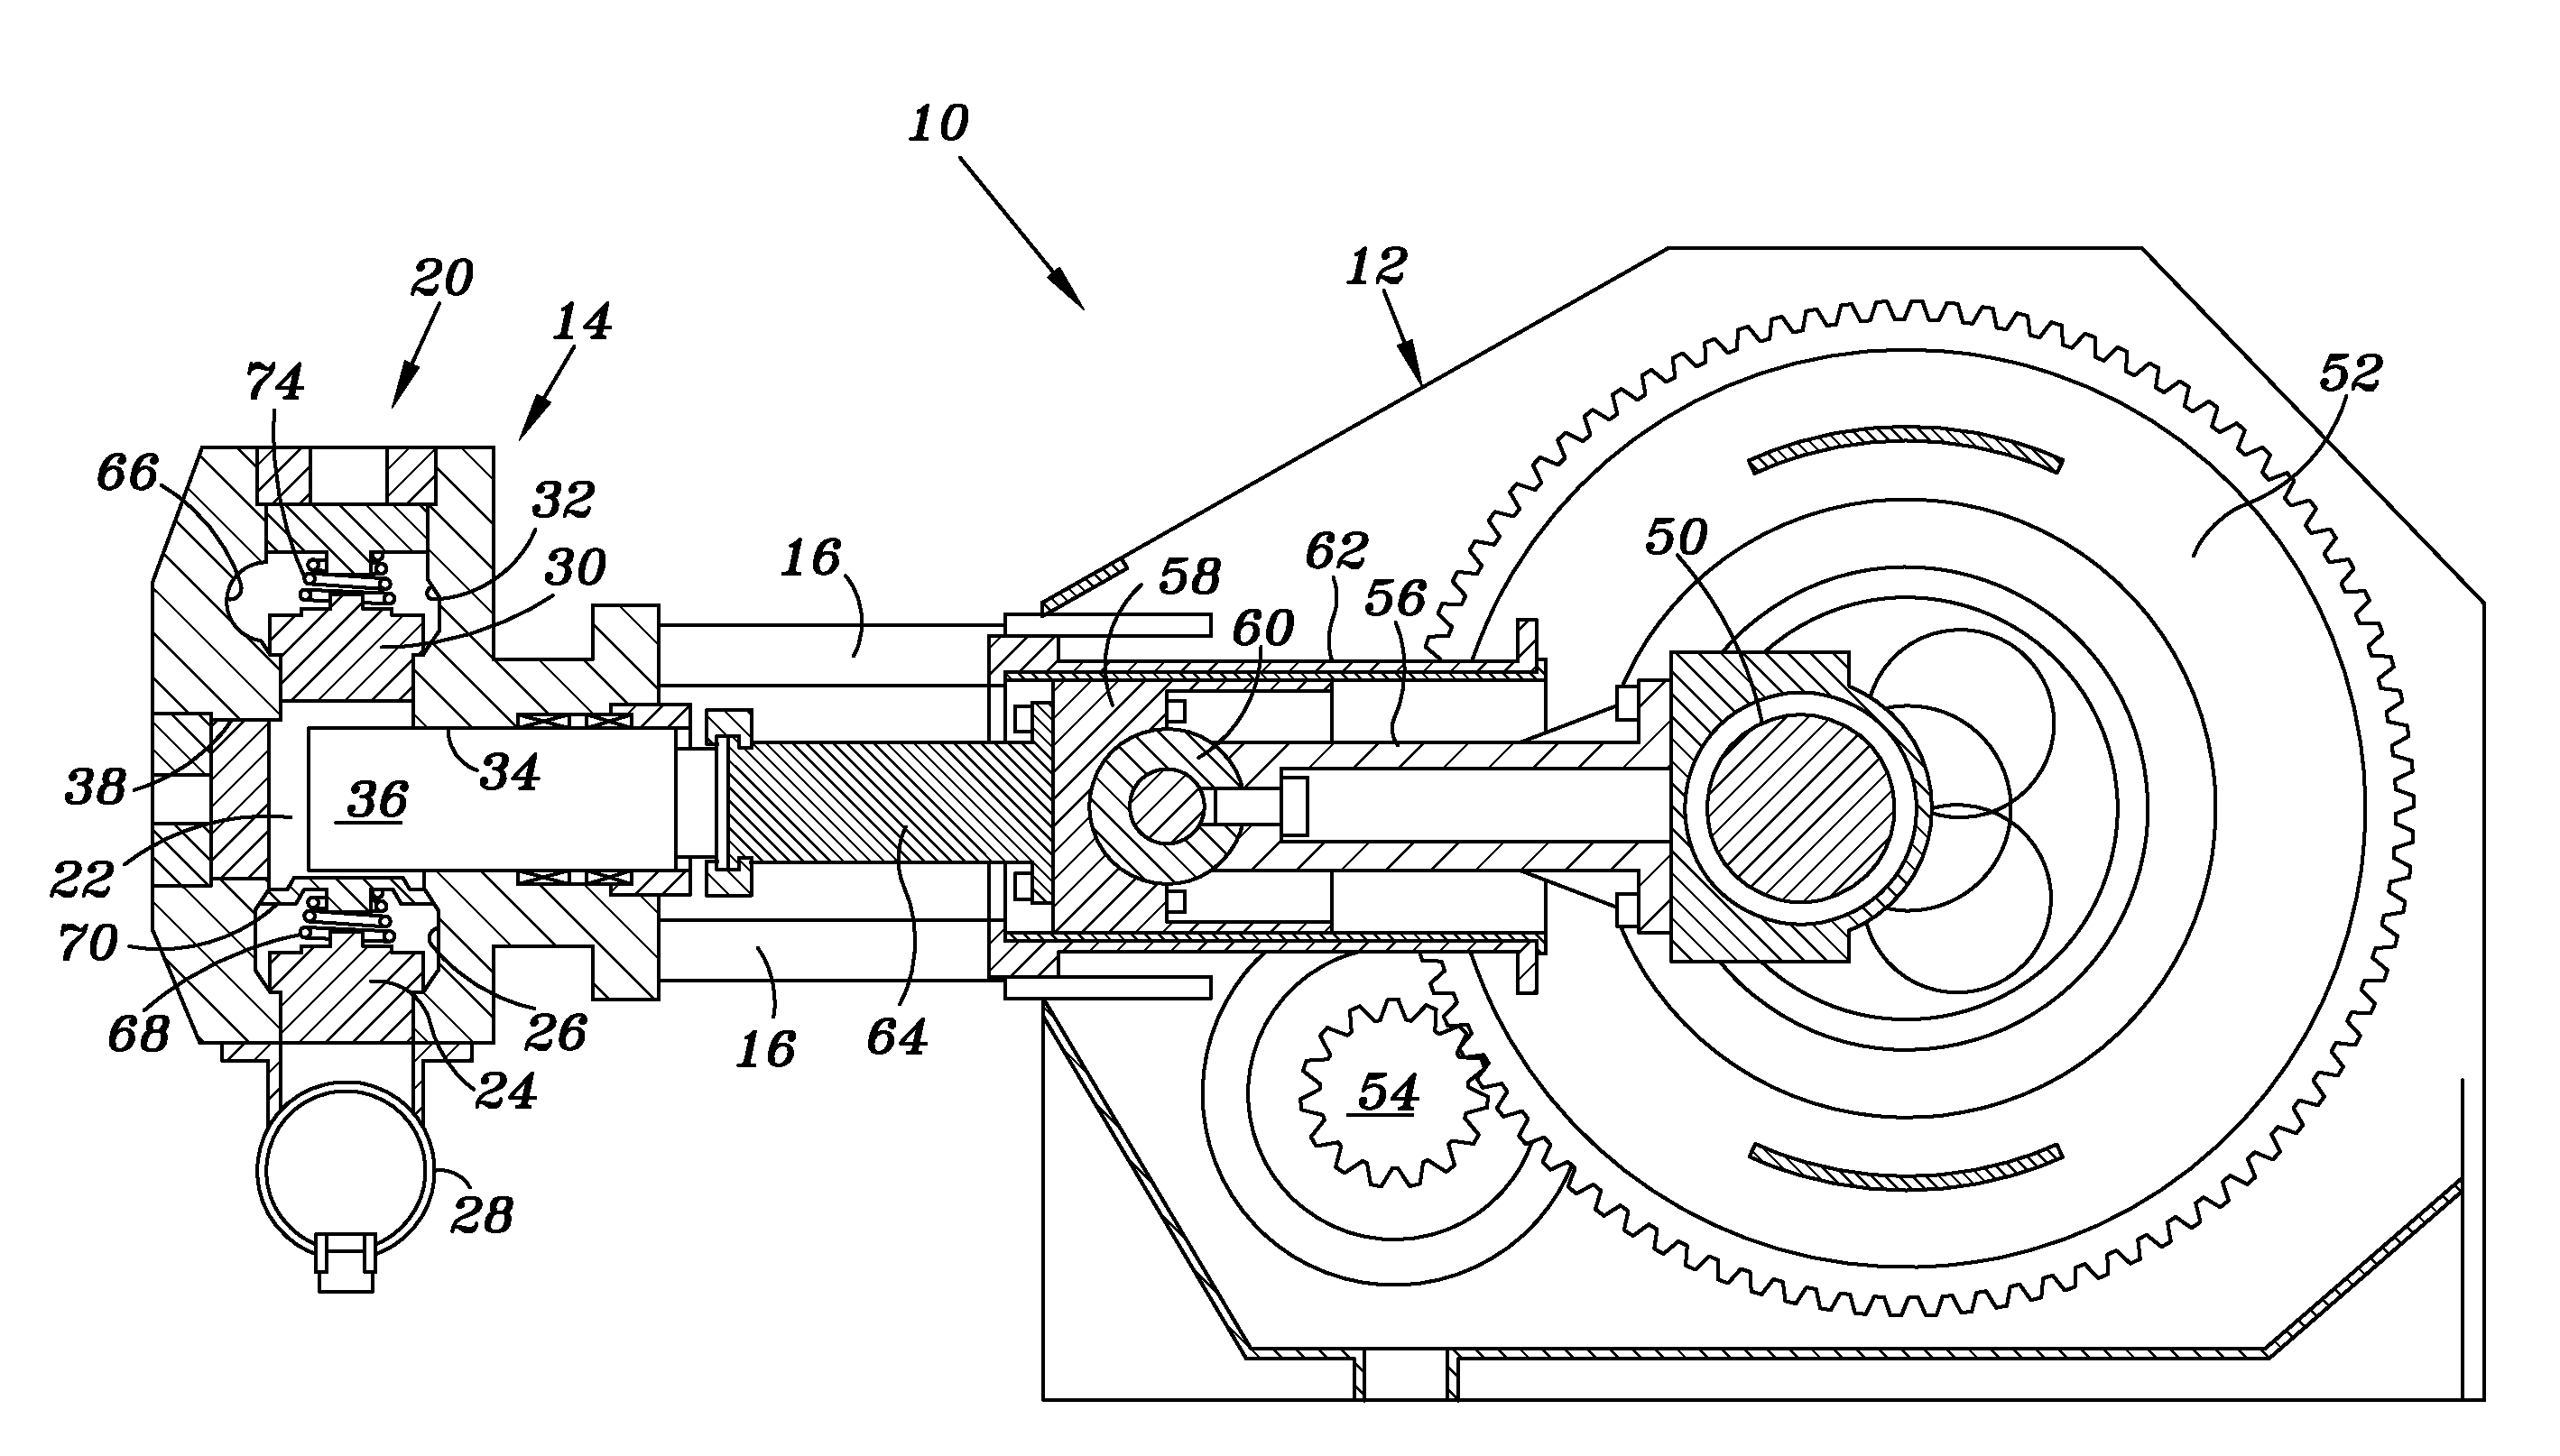 Reciprocating pump with intersecting bore geometry